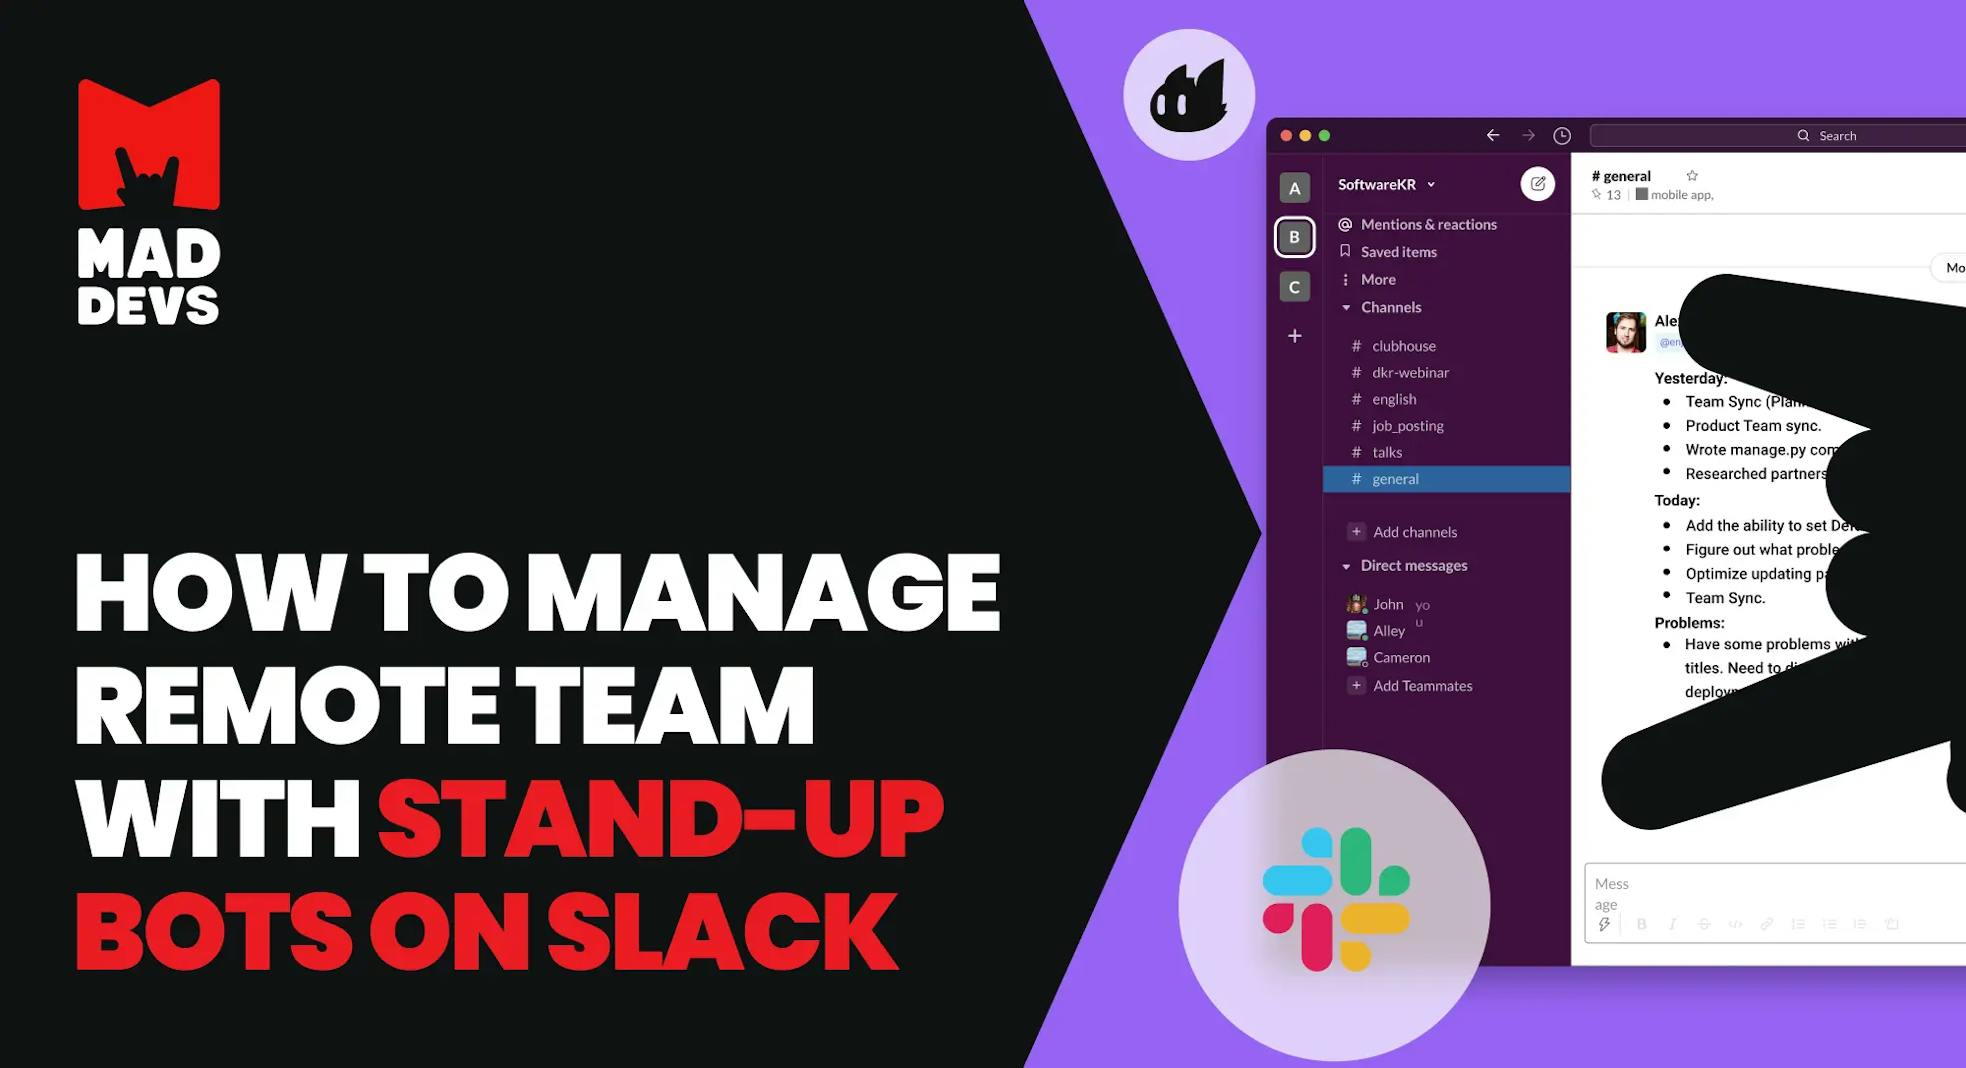 How to Manage Remote Team with Stand-Up Bots on Slack